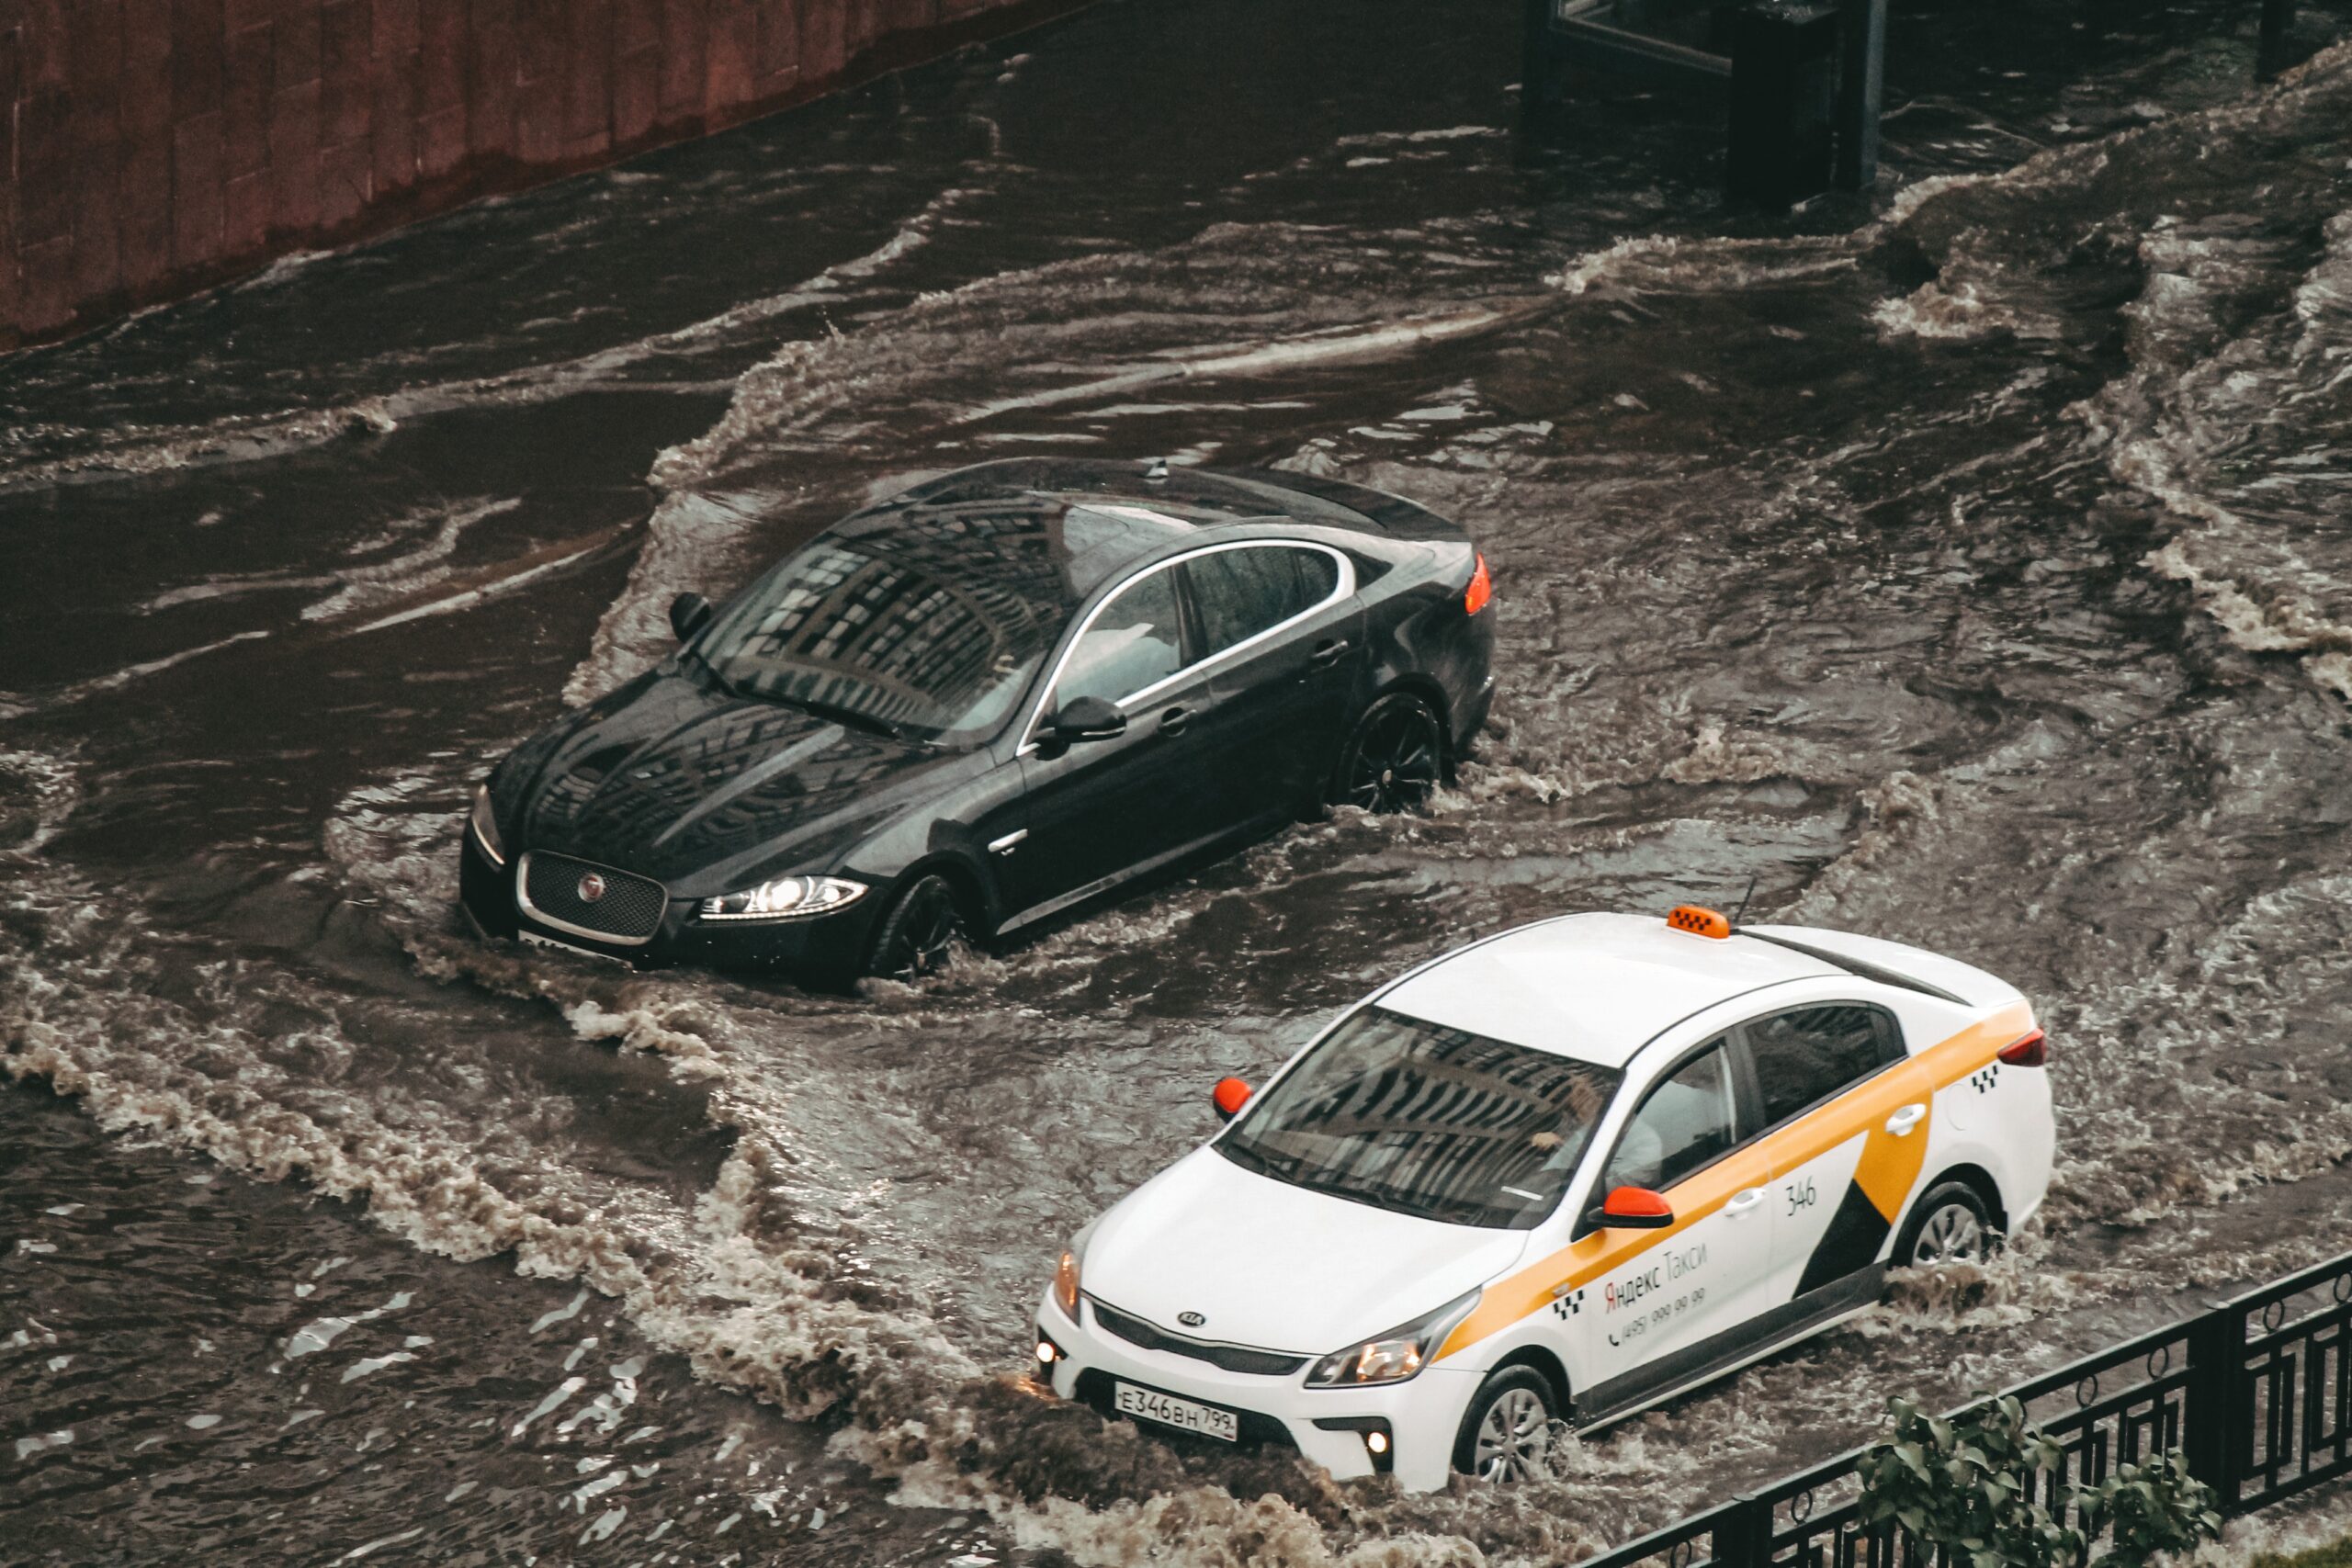 Why is it dangerous to drive in flash flood?